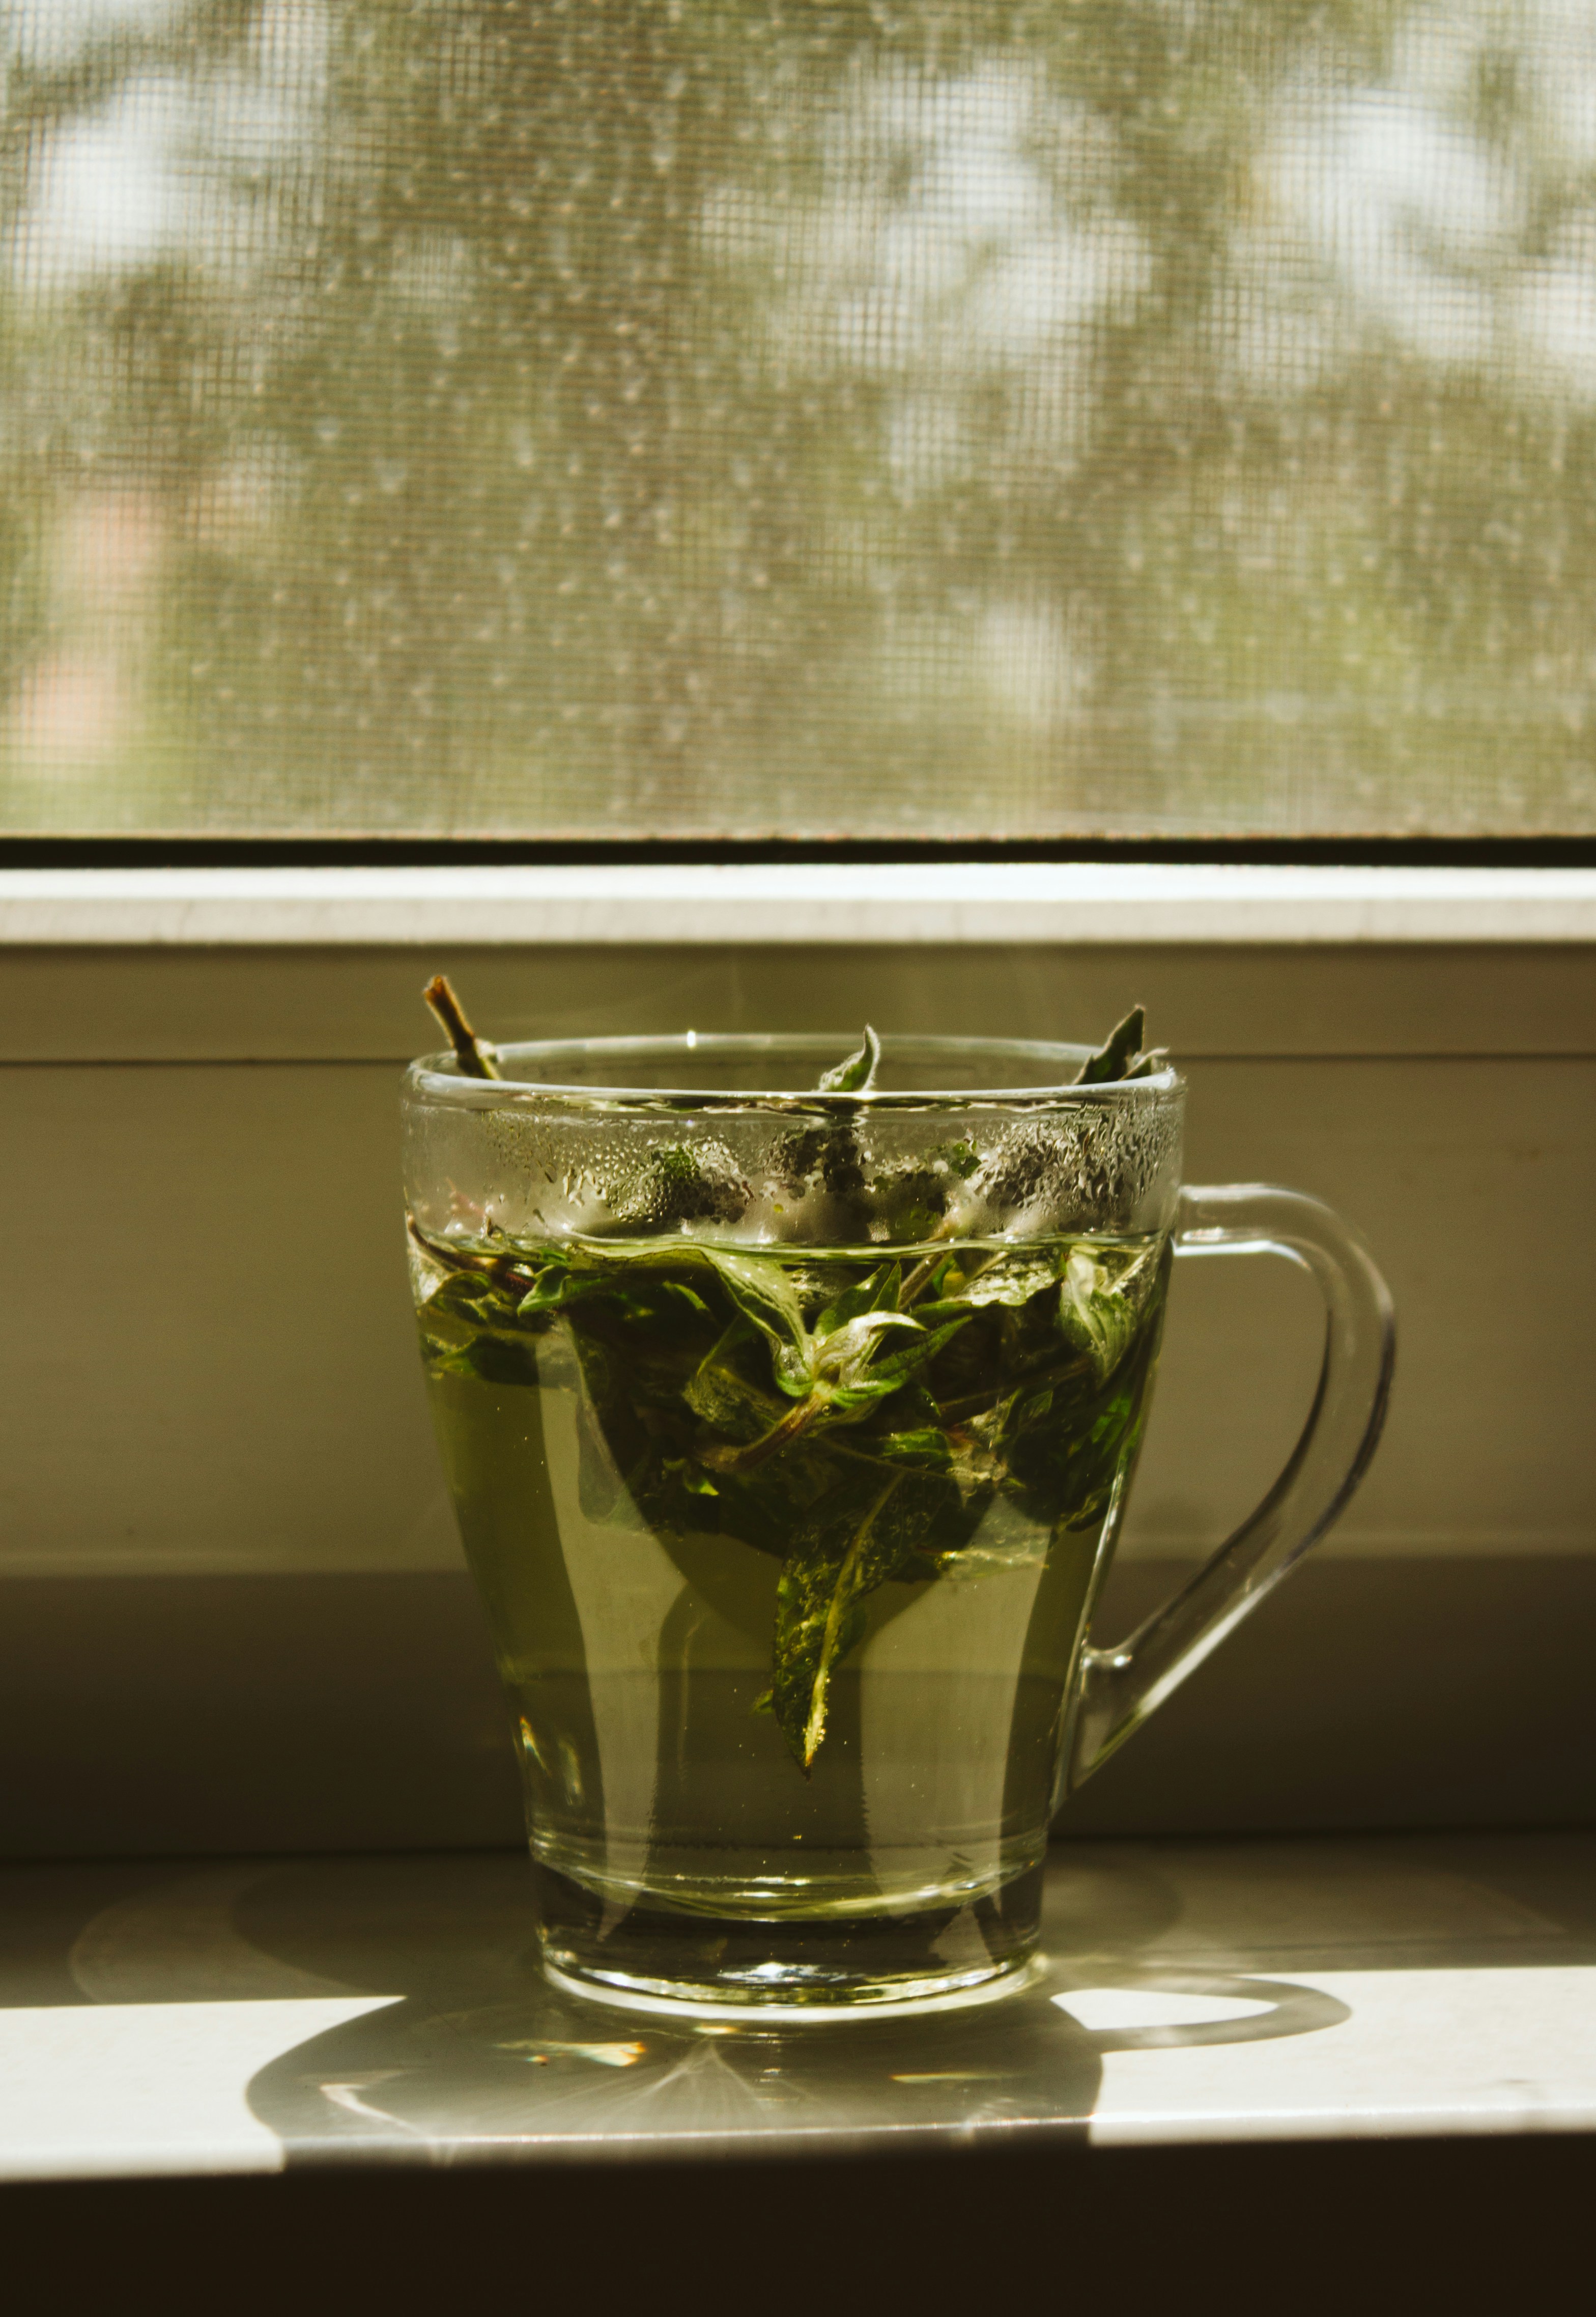 Green Tea Goodness: Uncover the Health Wonders - 15 maggiedeez